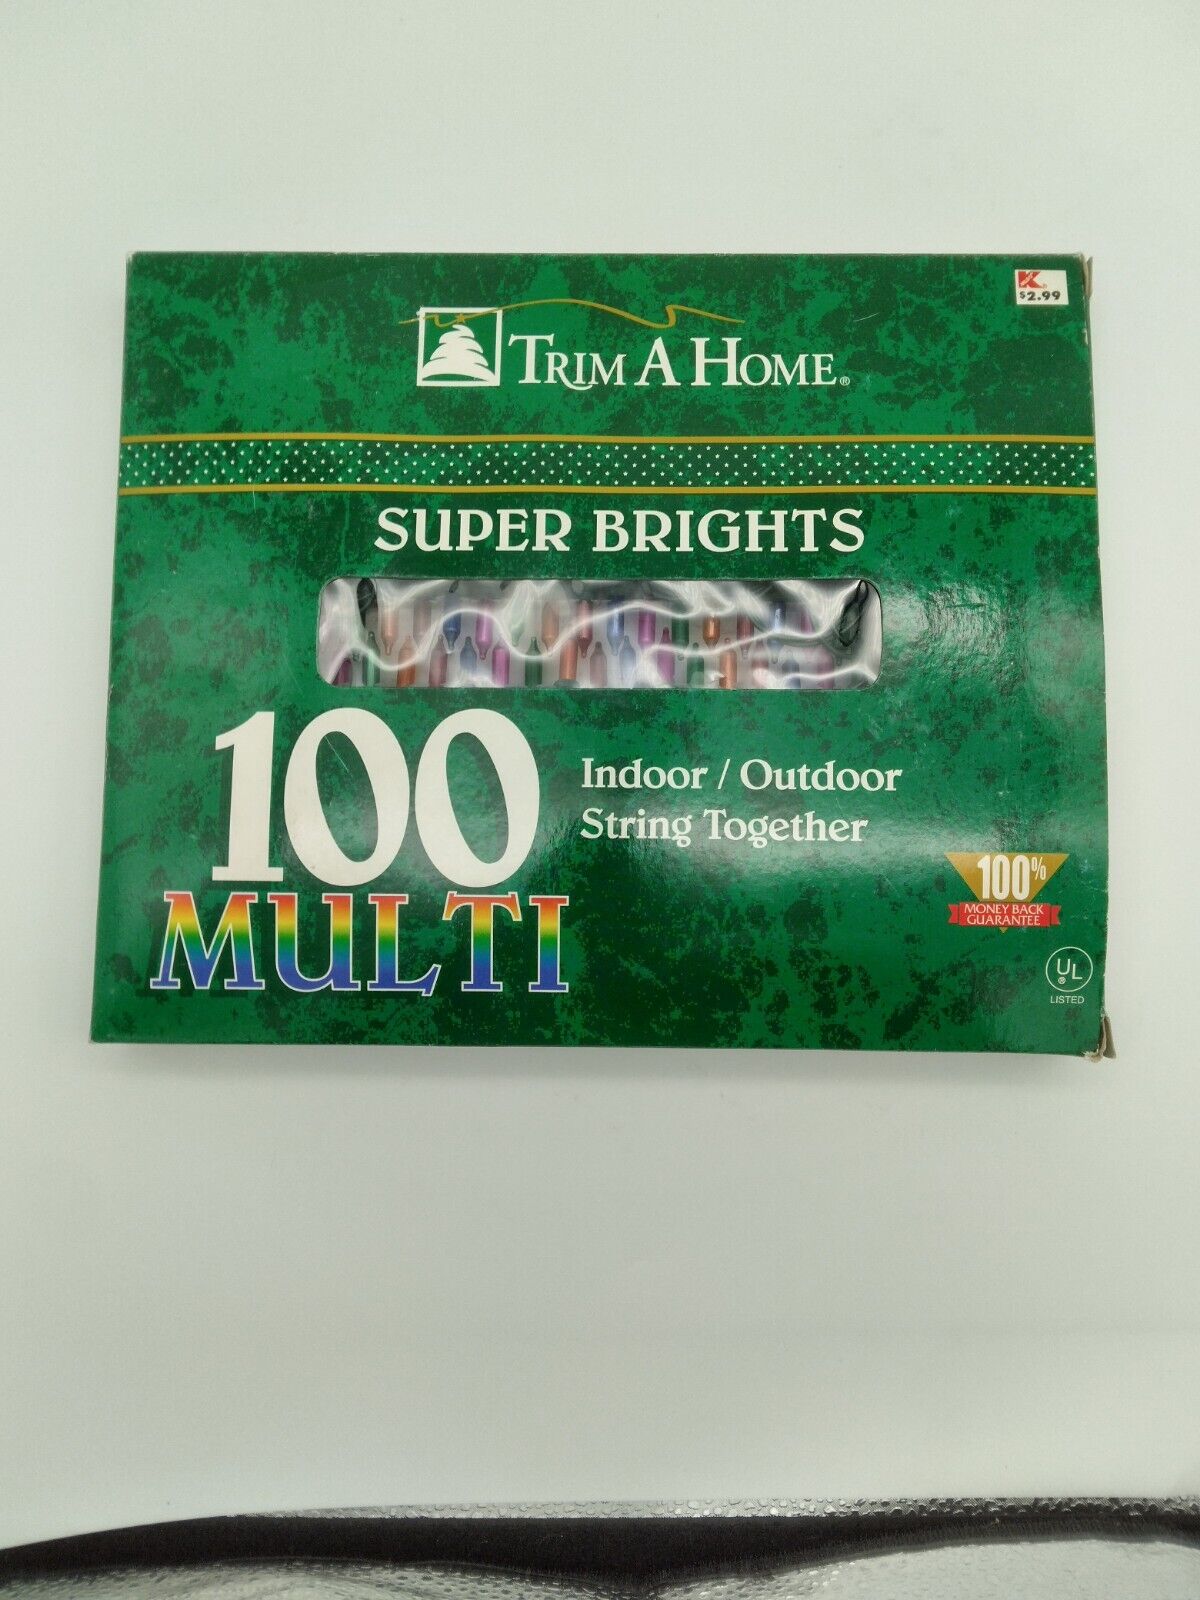 Trim A Home 100 Multi Super Bright's Indoor Outdoor String A Long Light Set